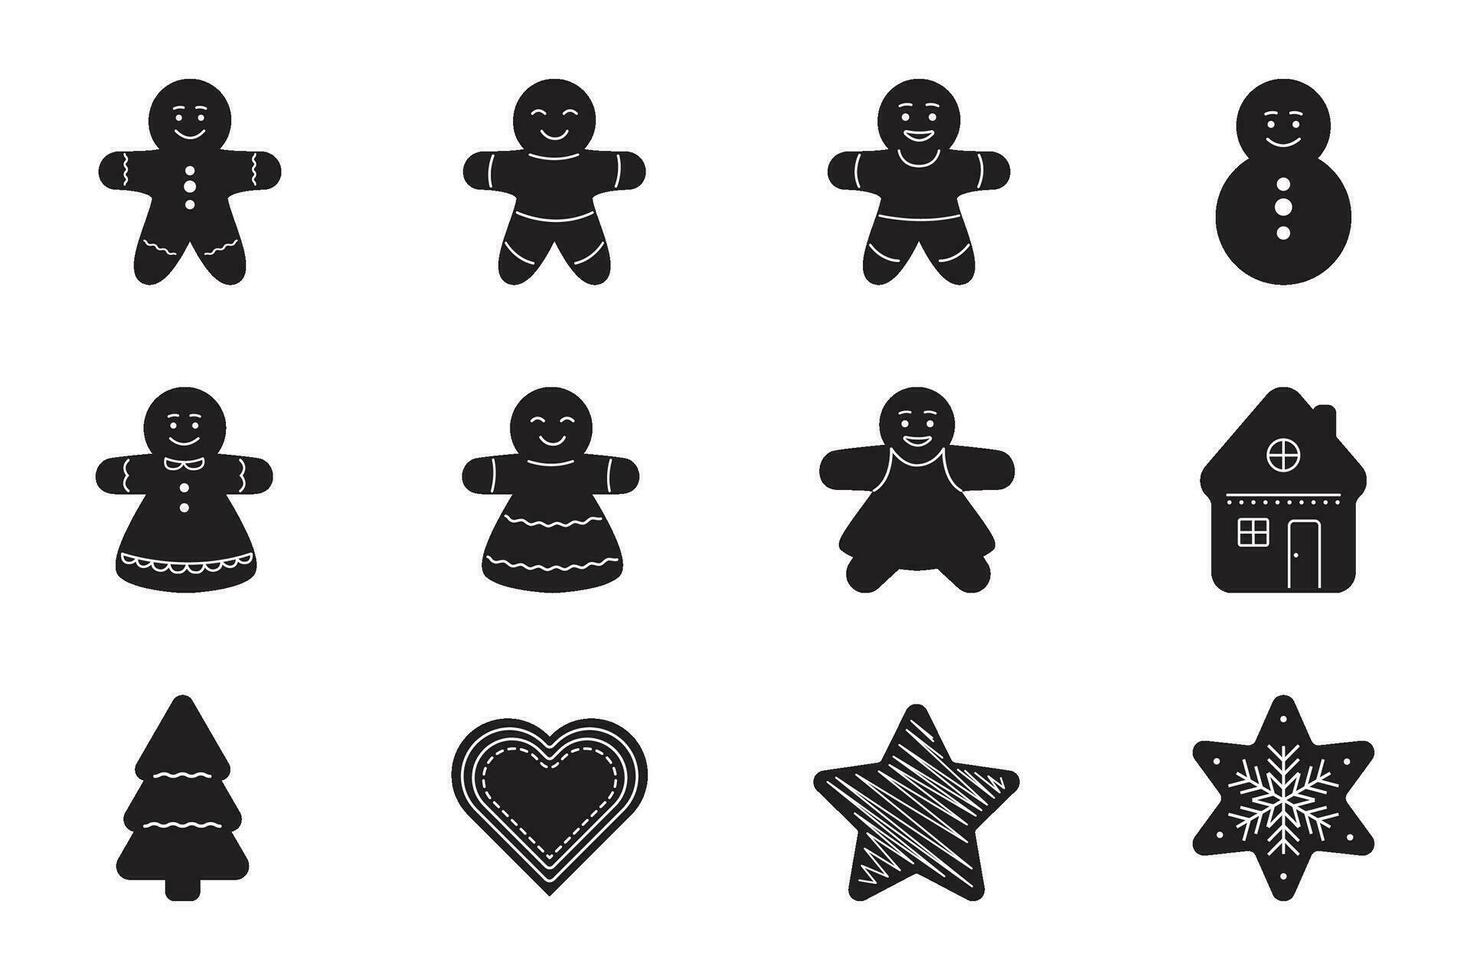 Black Christmas gingerbread cookies set. winter sweet homemade biscuits in the form of different characters vector